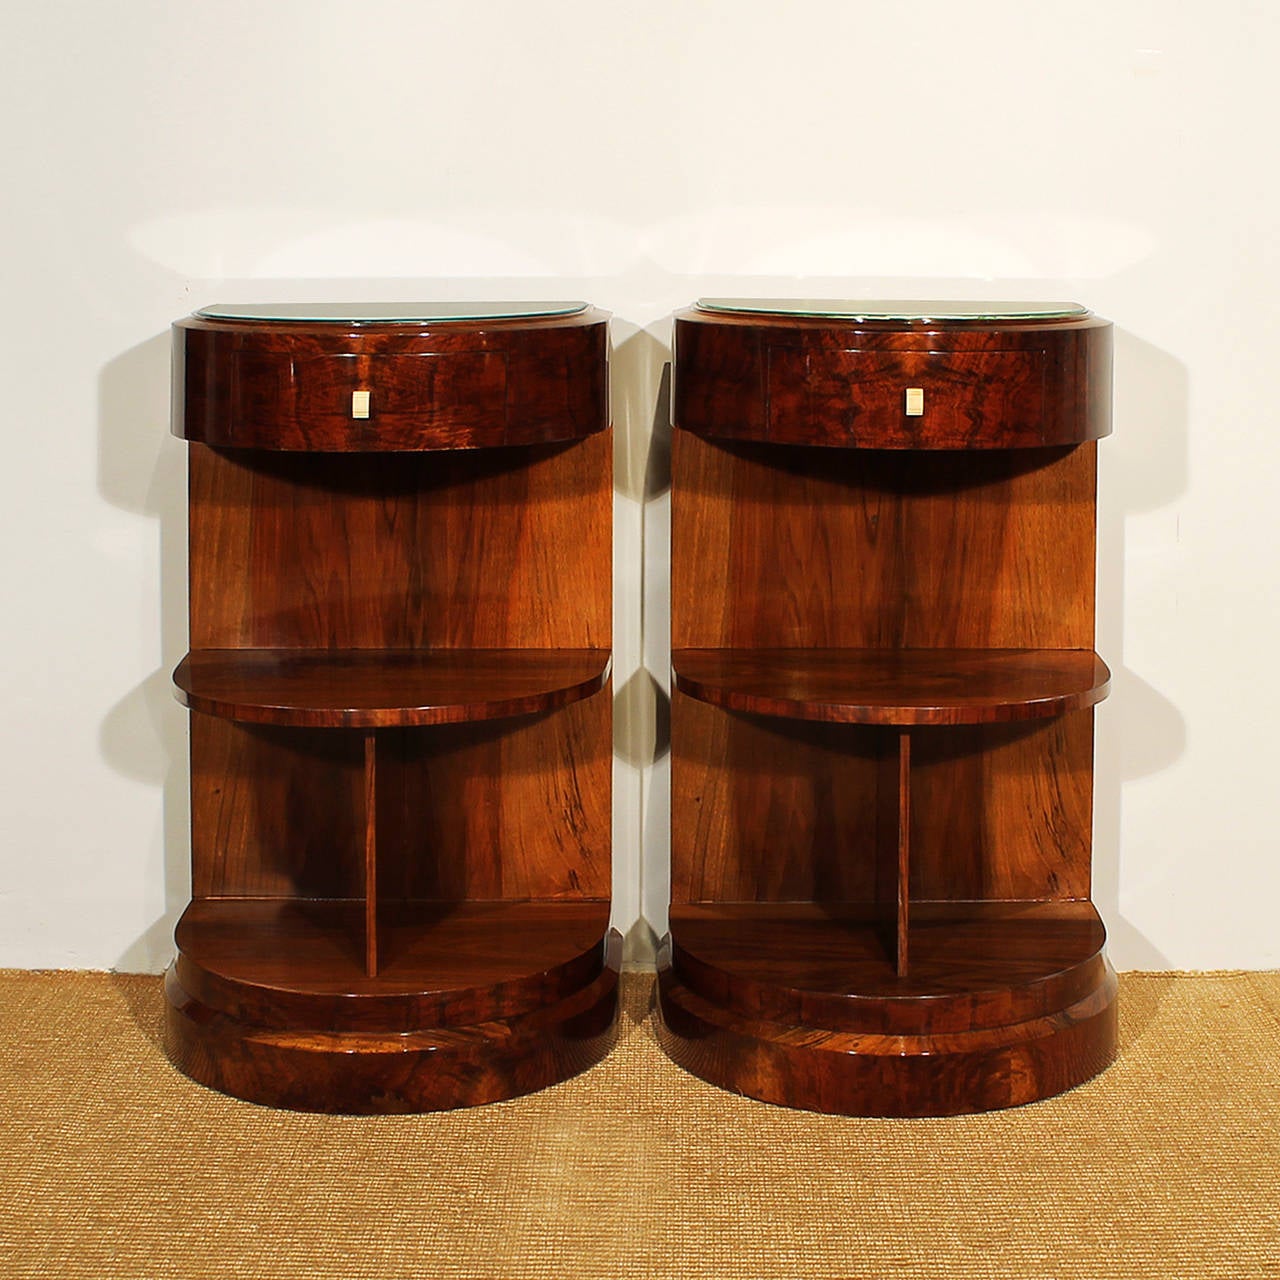 Pair of Art Deco semi-circular nightstands, walnut veneer, French polish, one drawer, two shelves, one with separation, bakelite handles, parchment and glass on top.
France, circa 1930.